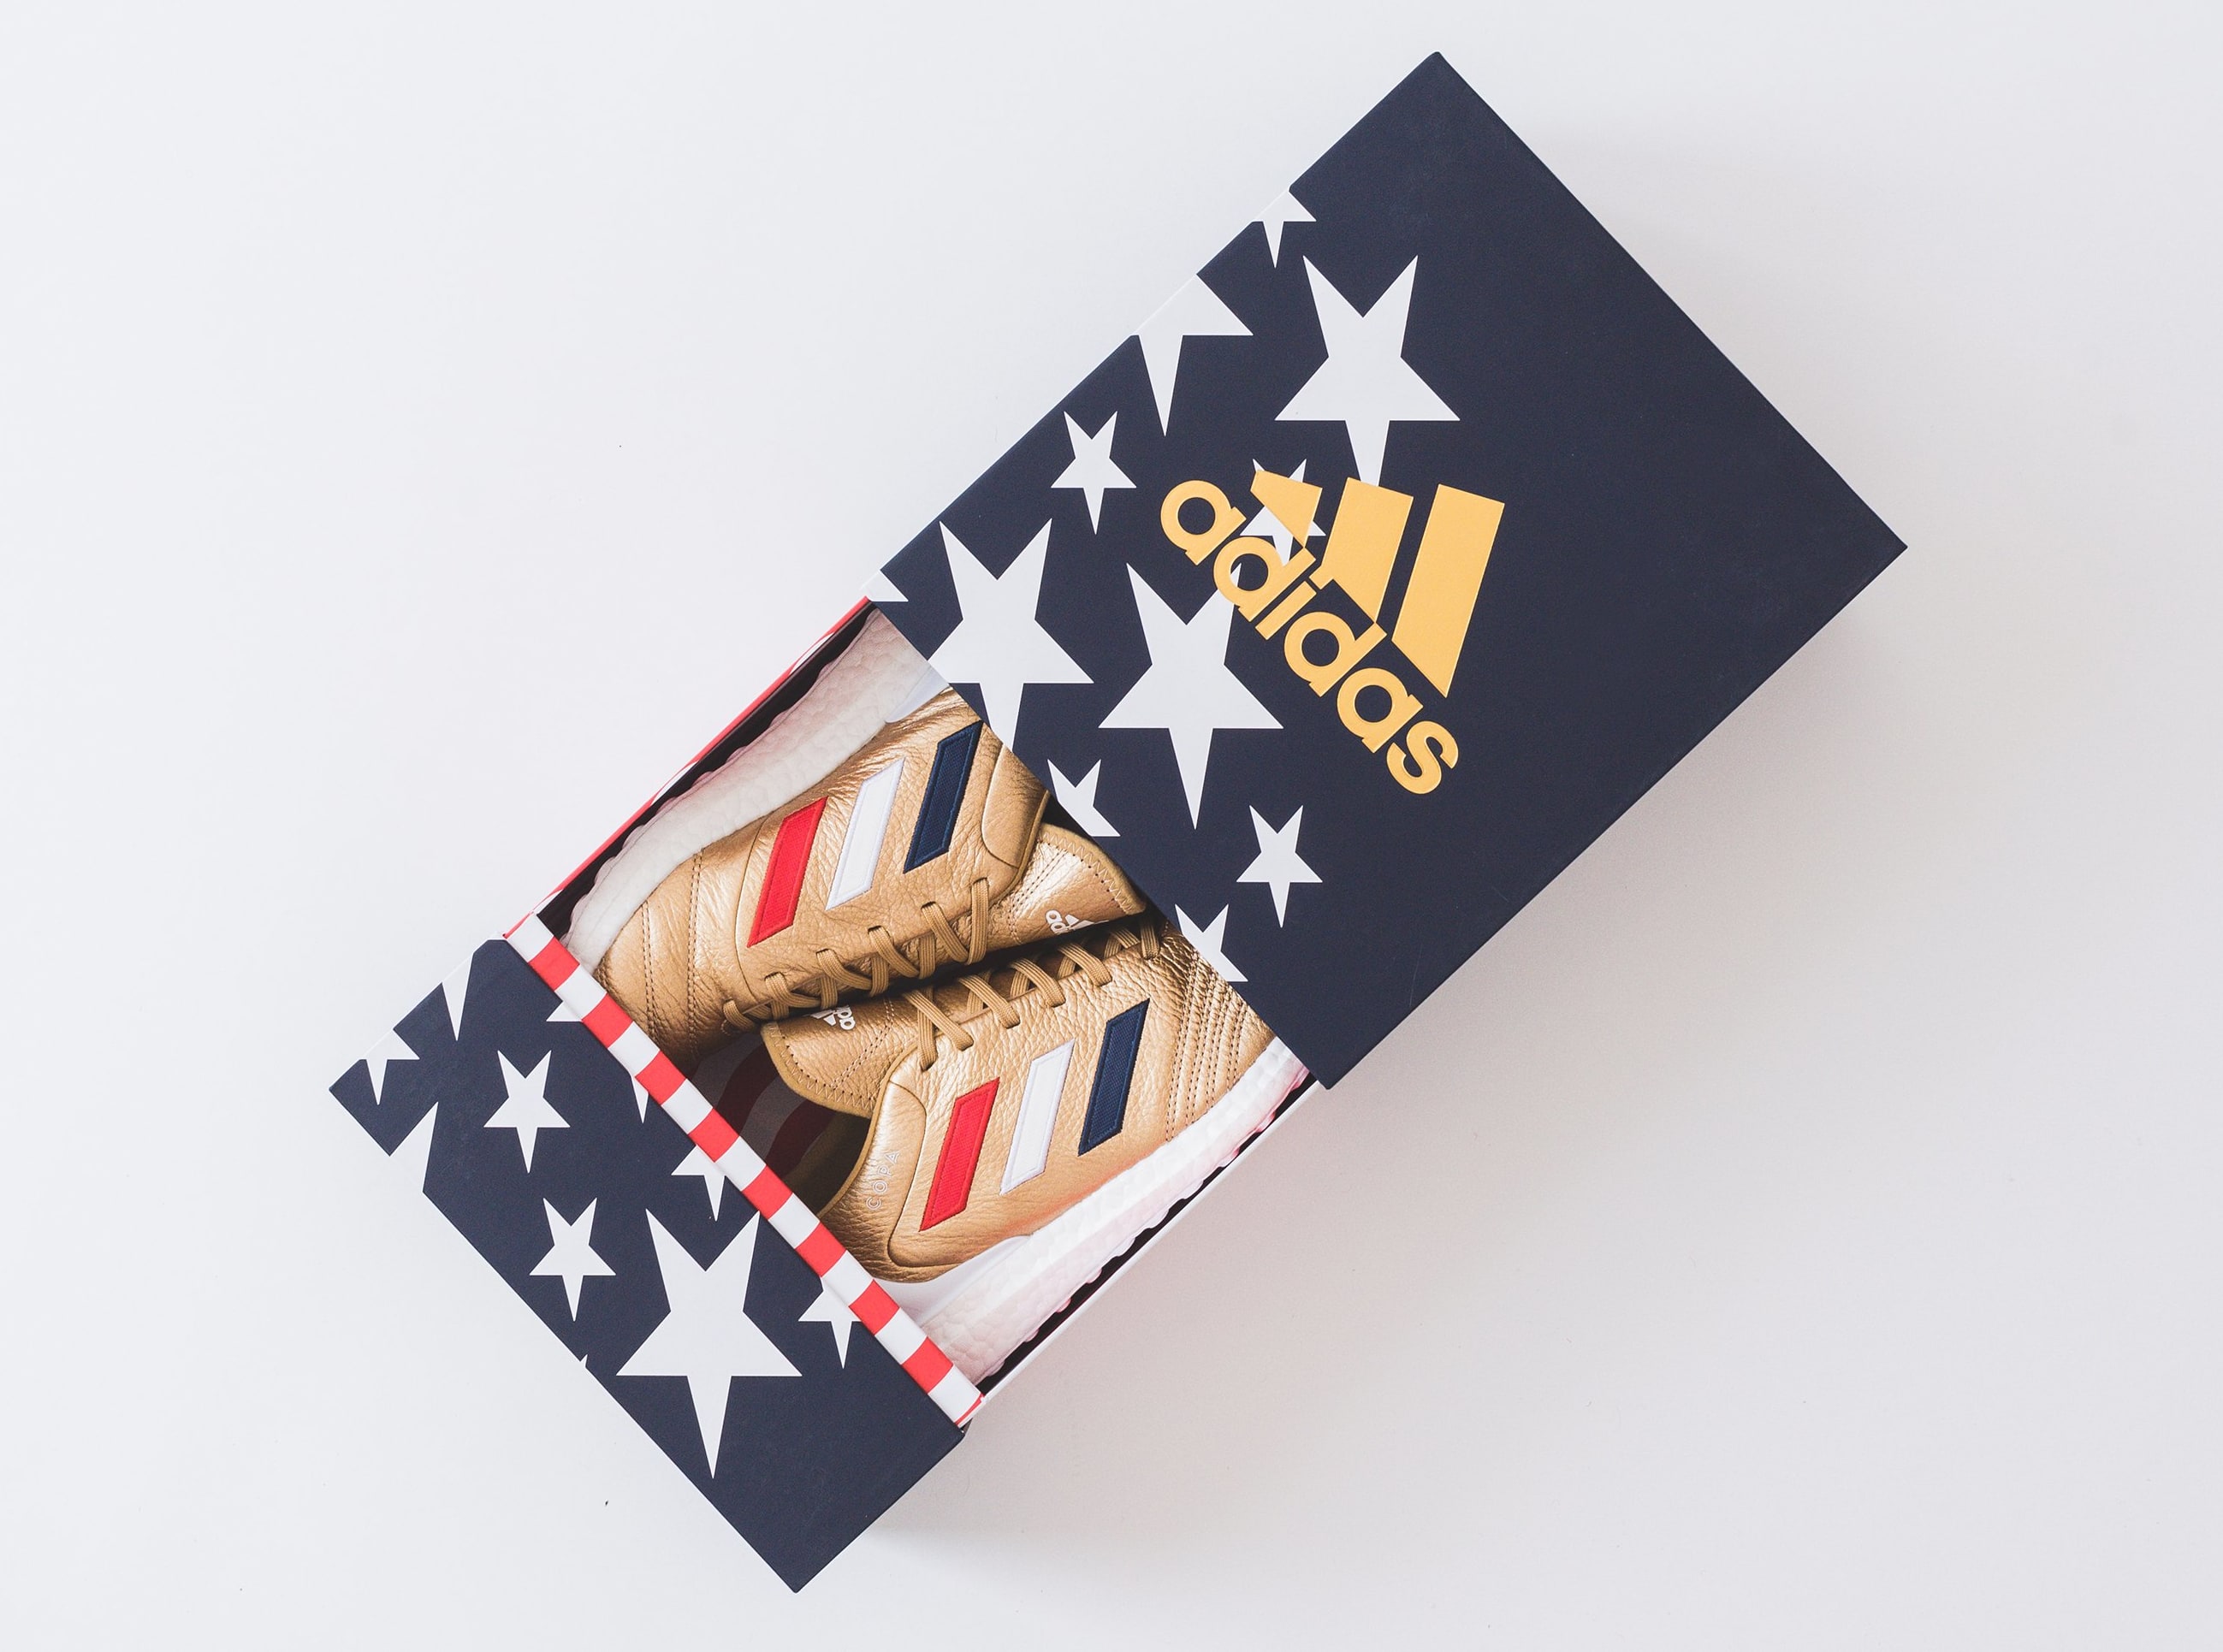 Kith x Adidas Soccer Copa Mundial 18 Ultra Boost (Packaging)